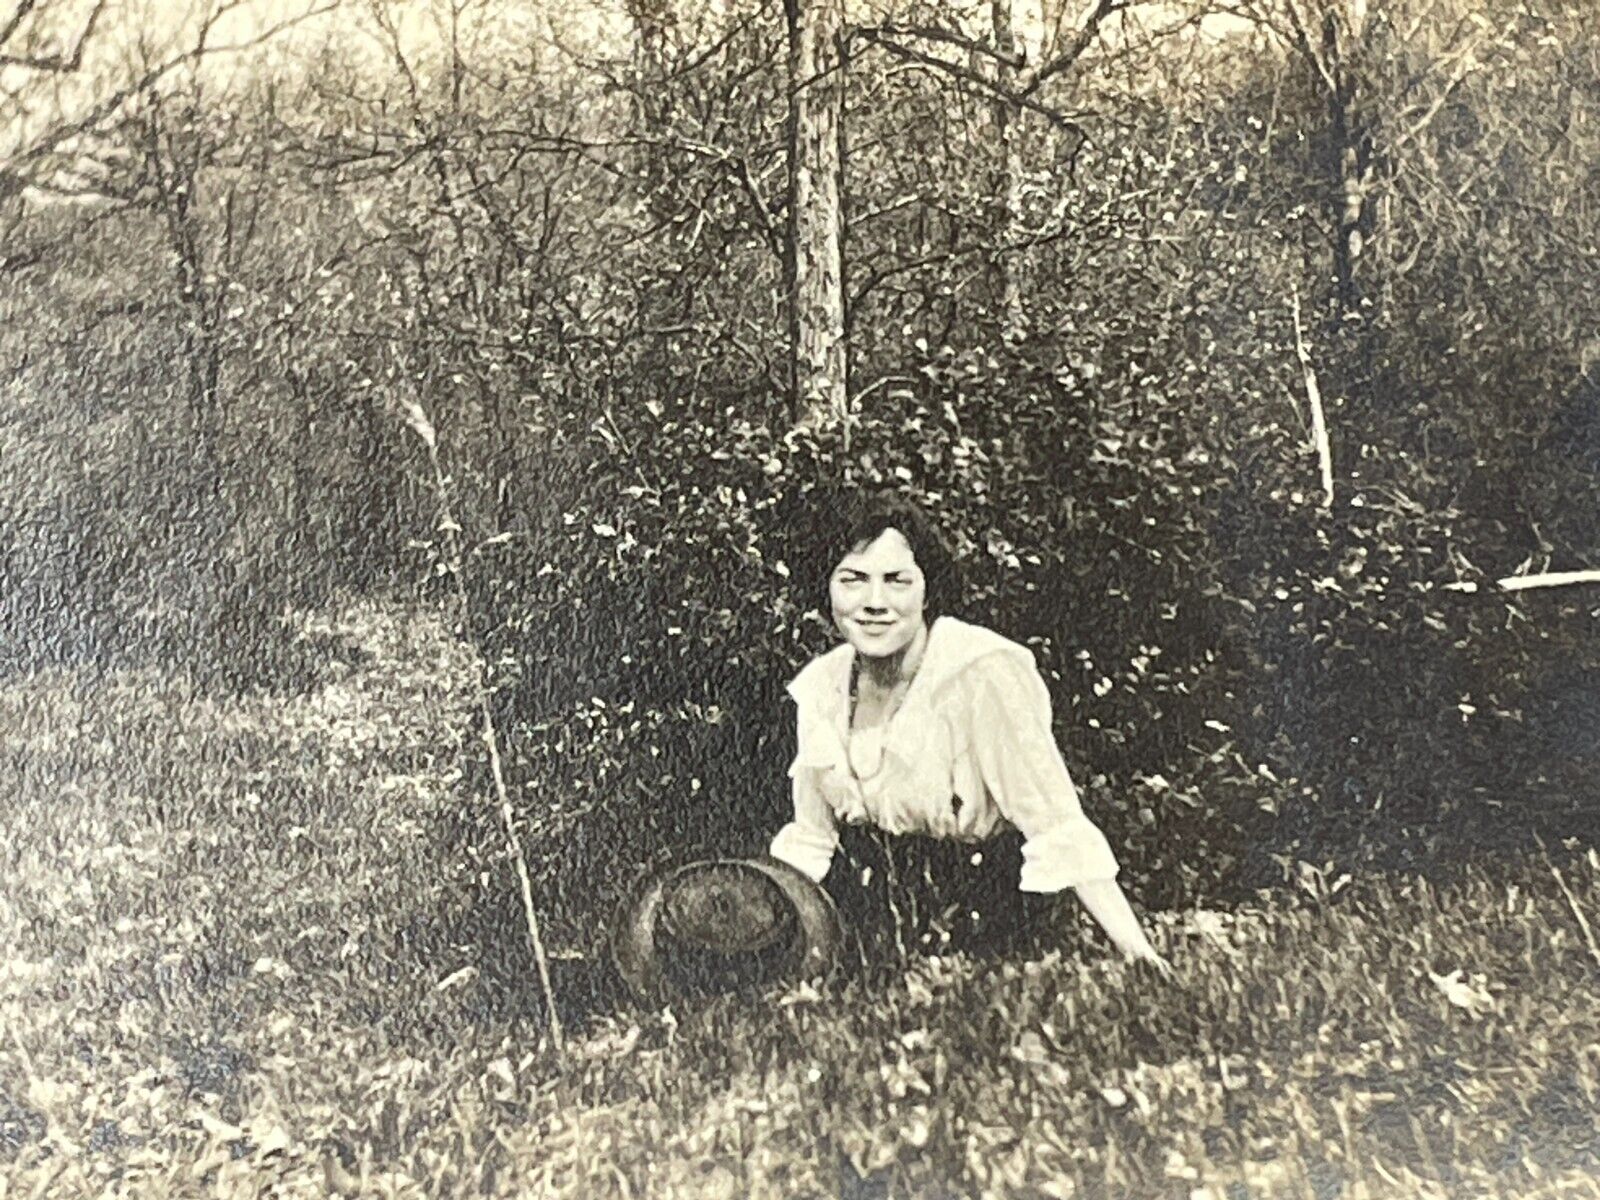 IF Photograph Pretty Lovely Beautiful Woman 1918 Posing In Country Woods 